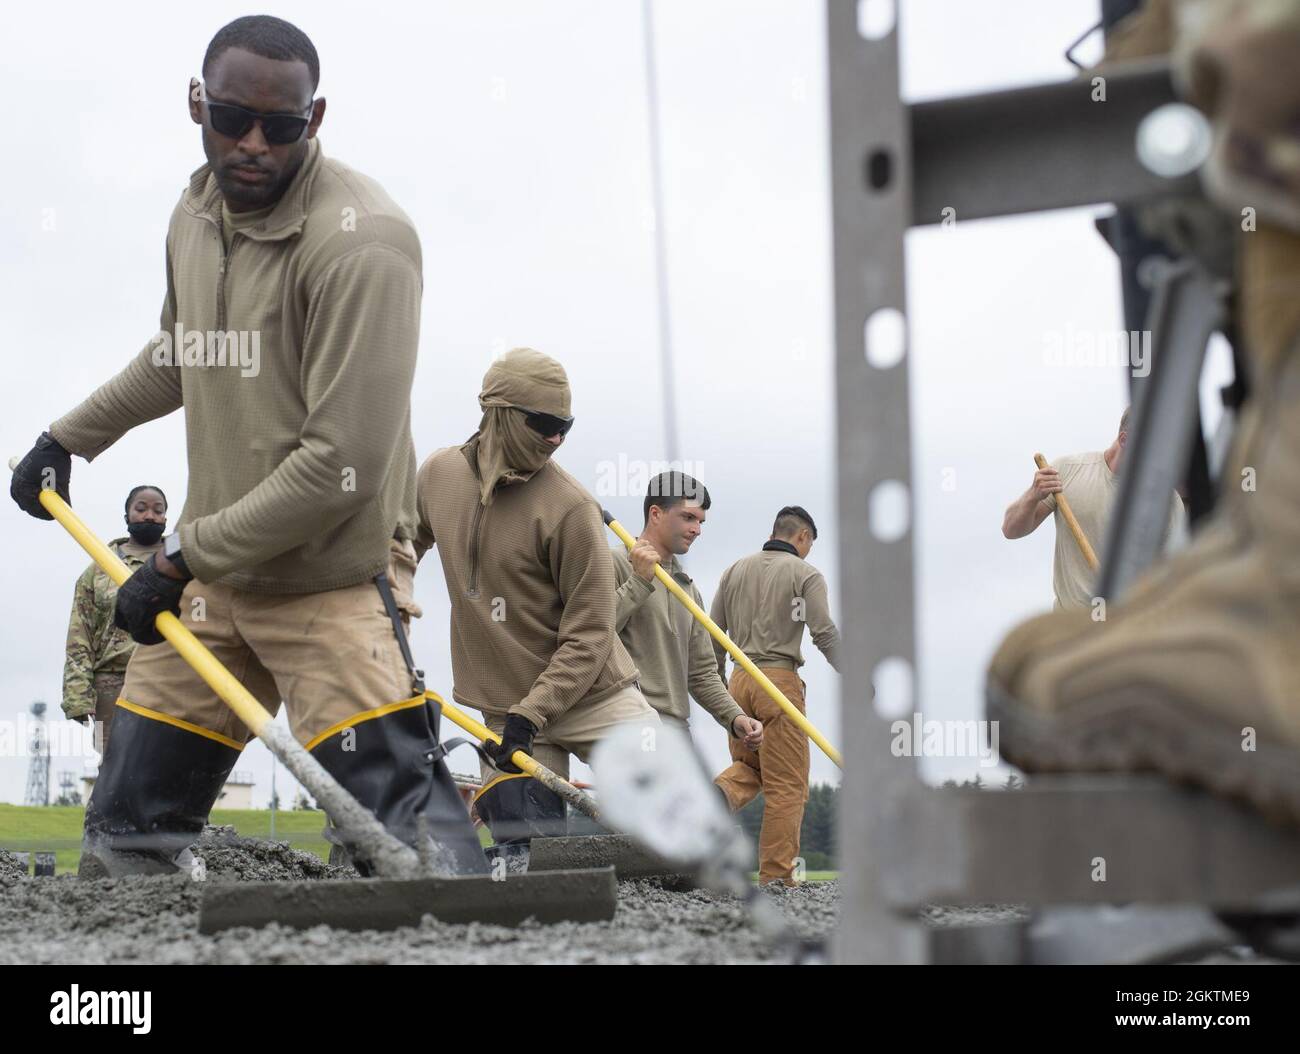 Airmen assigned to the 800th RED HORSE Group, level wet concrete as part of a construction project to expand a flightline apron June 30, 2021, at Yokota Air Base, Japan. The construction project requires Airmen assigned to the 823rd, 819th and 820th RED HORSE Squadrons to pour approximately 7,300 cubic meters of concrete and pave 650 tons of asphalt in a construction effort to increase aircraft parking capabilities at Yokota Air Base. The apron expansion is the first in an approximately four-year phased construction effort to enhance Yokota Air Base’s airlift mission capabilities. Stock Photo